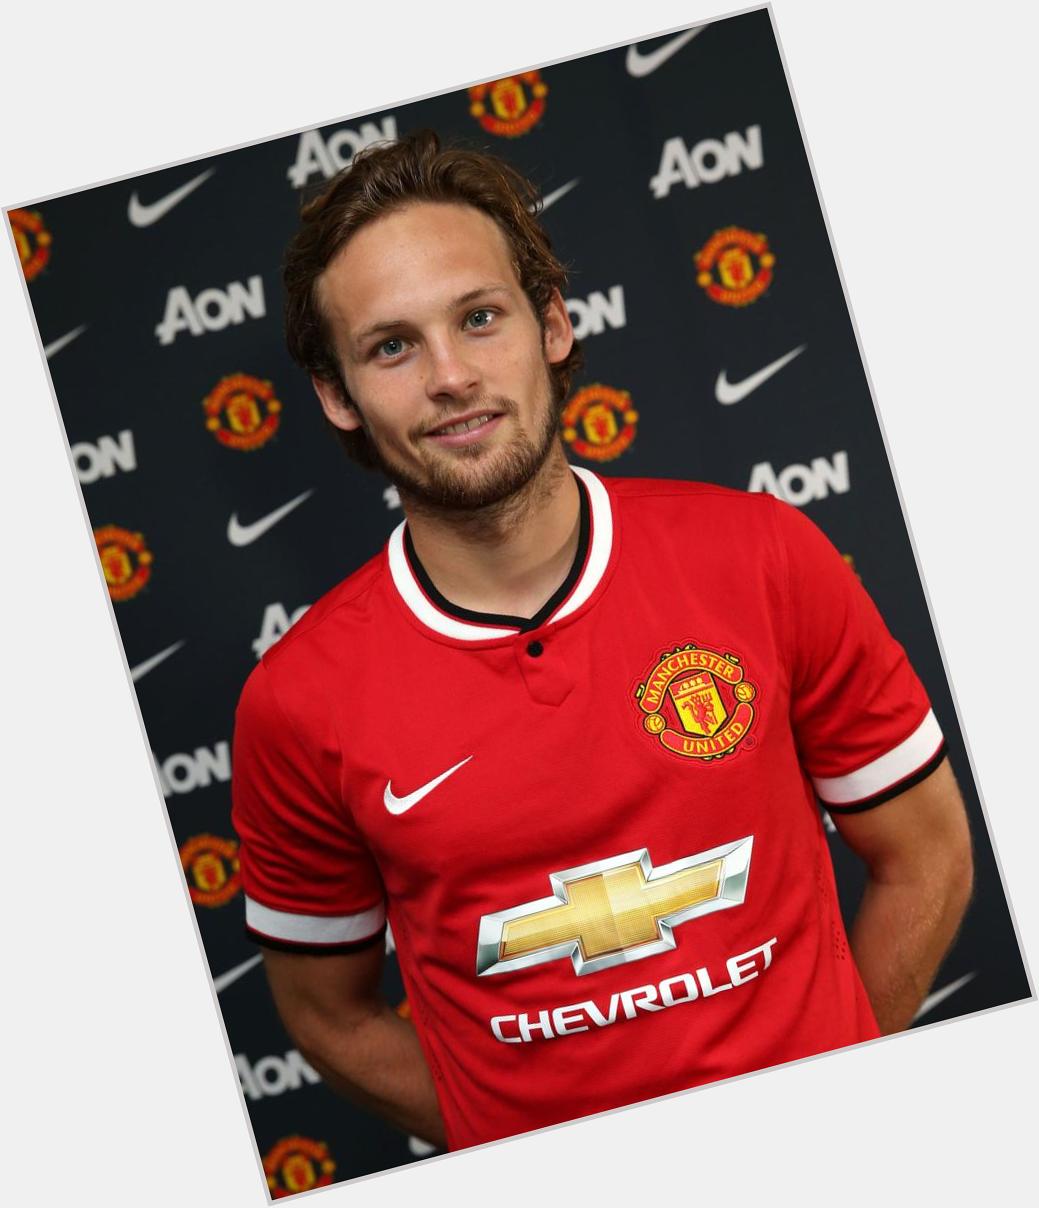 Happy Birthday to Manchester United midfielder Daley Blind, who turns 25 today. 